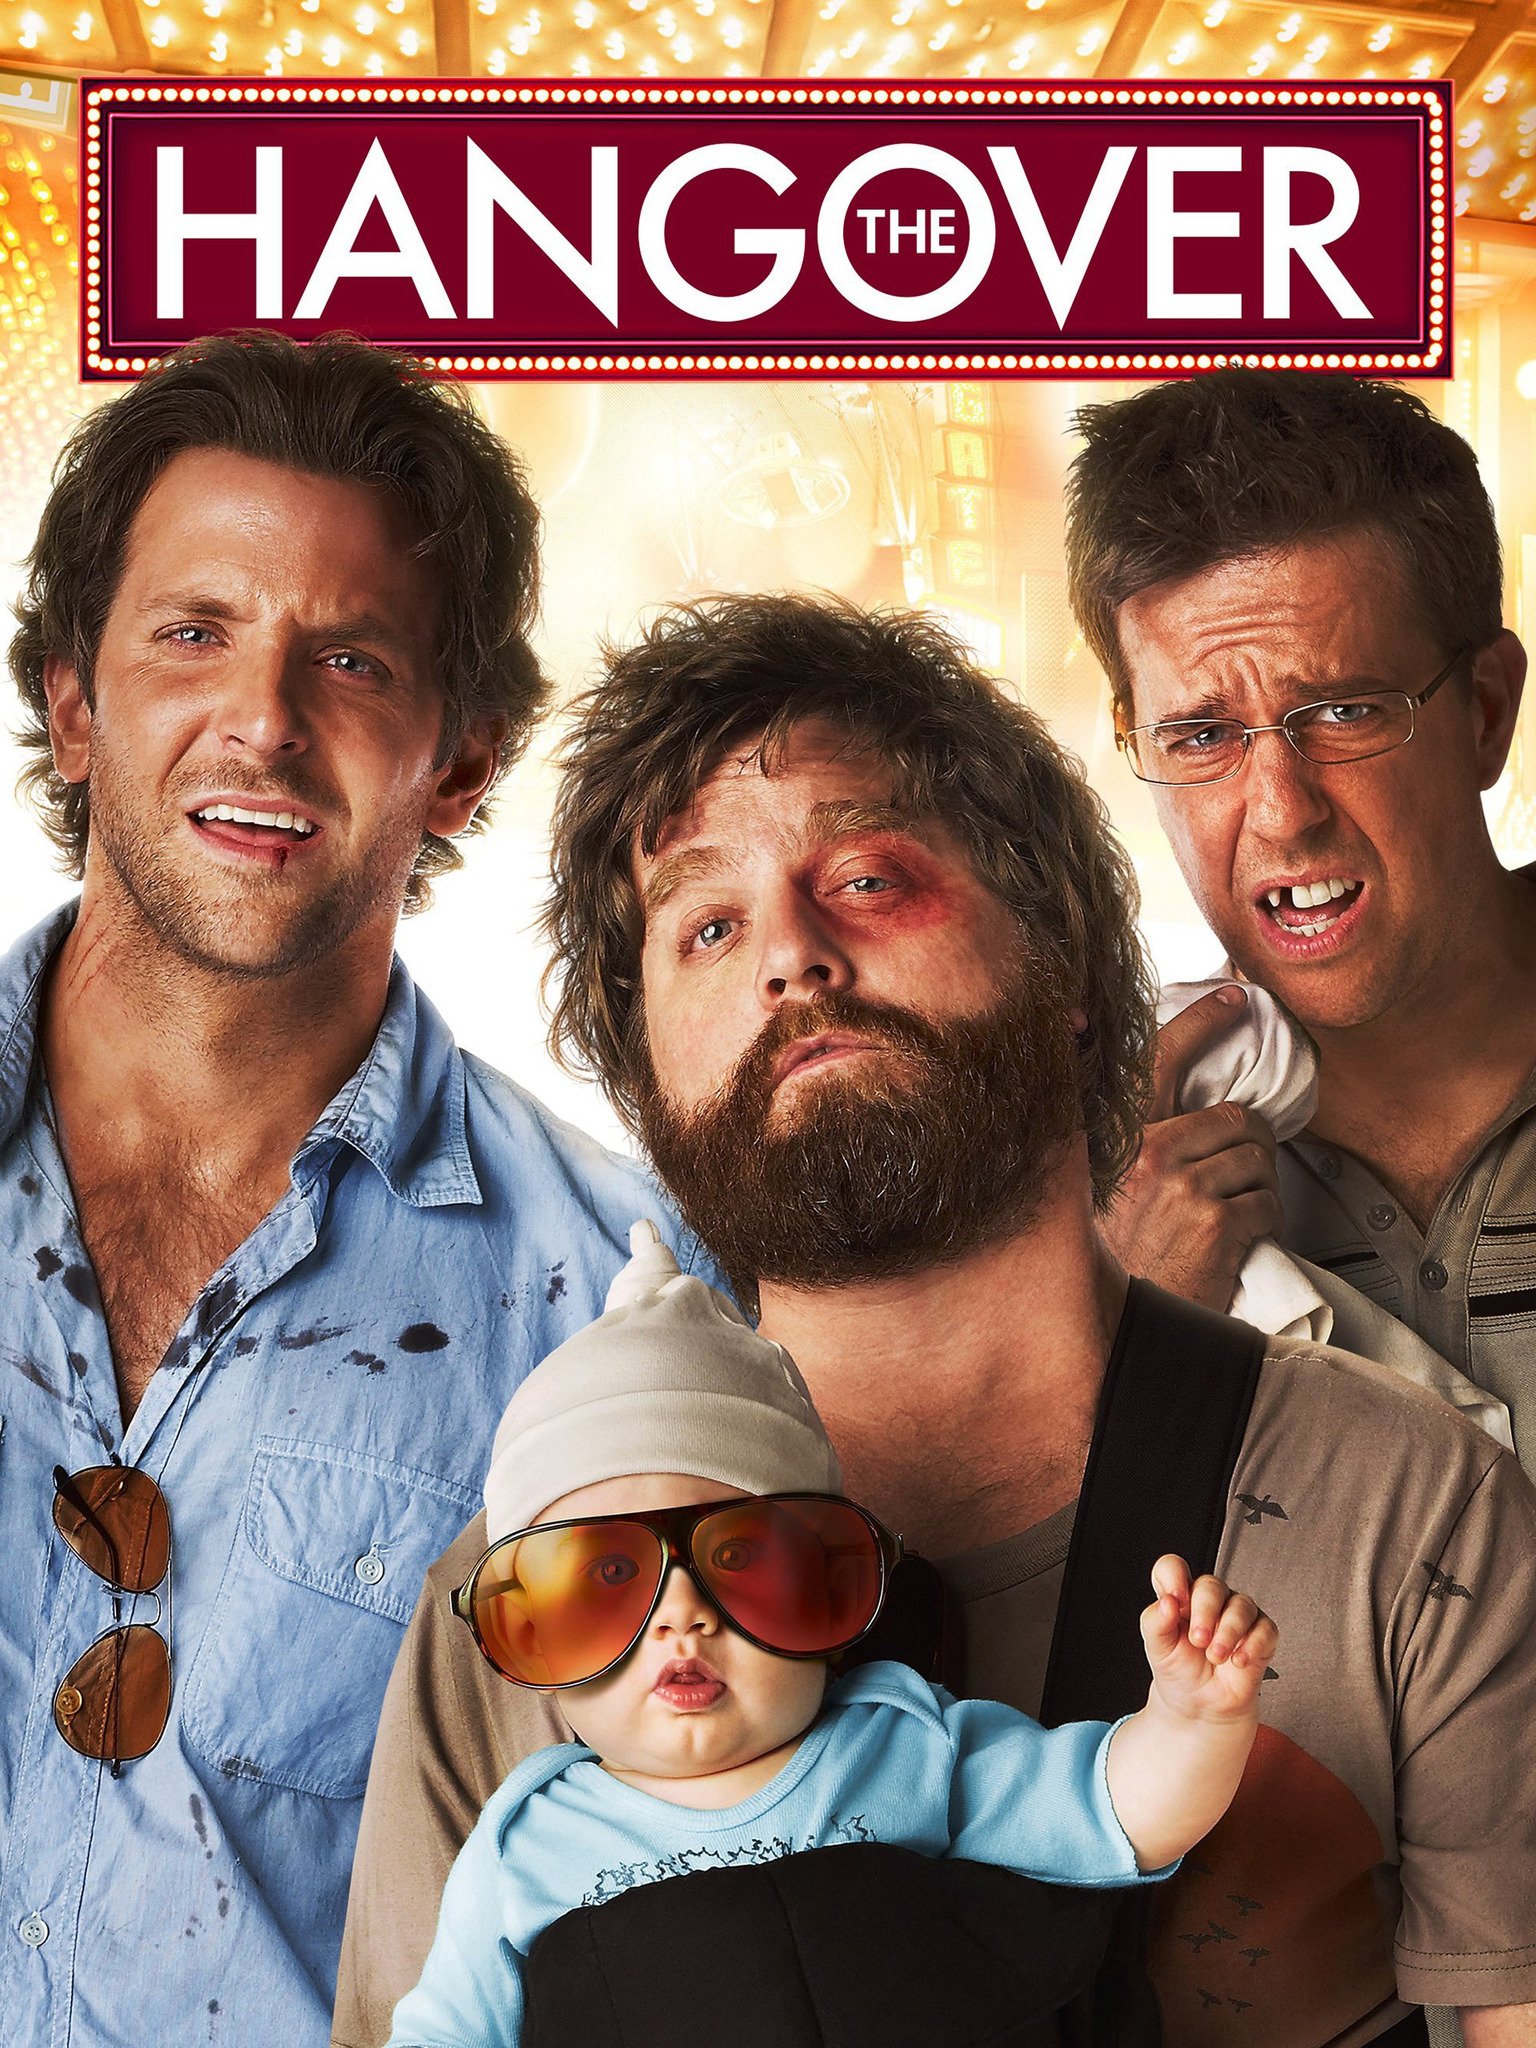 The Hangover (2009) - Rotten Tomatoes